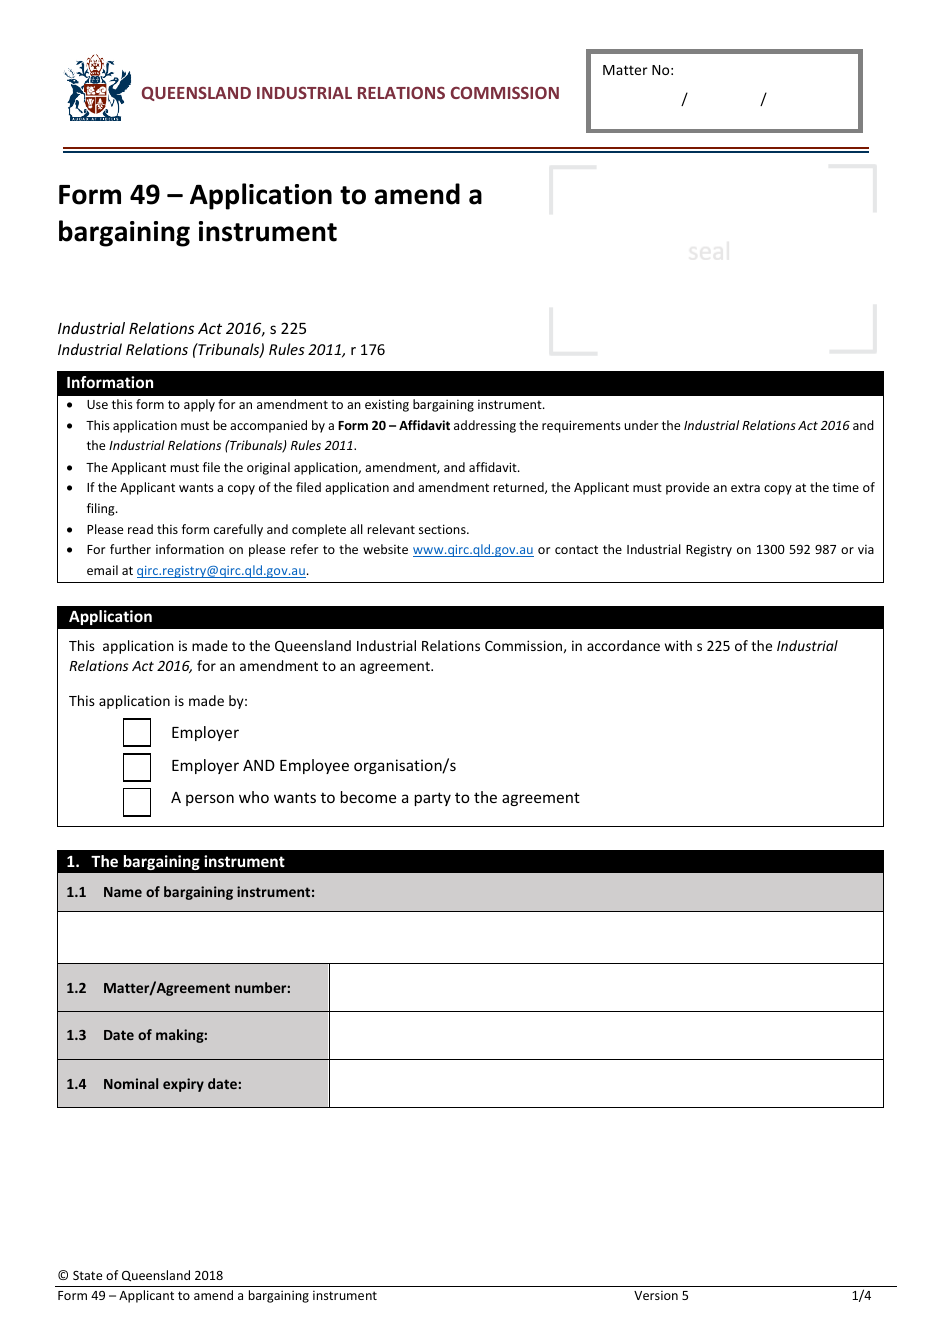 Form 49 Application to Amend a Bargaining Instrument - Queensland, Australia, Page 1